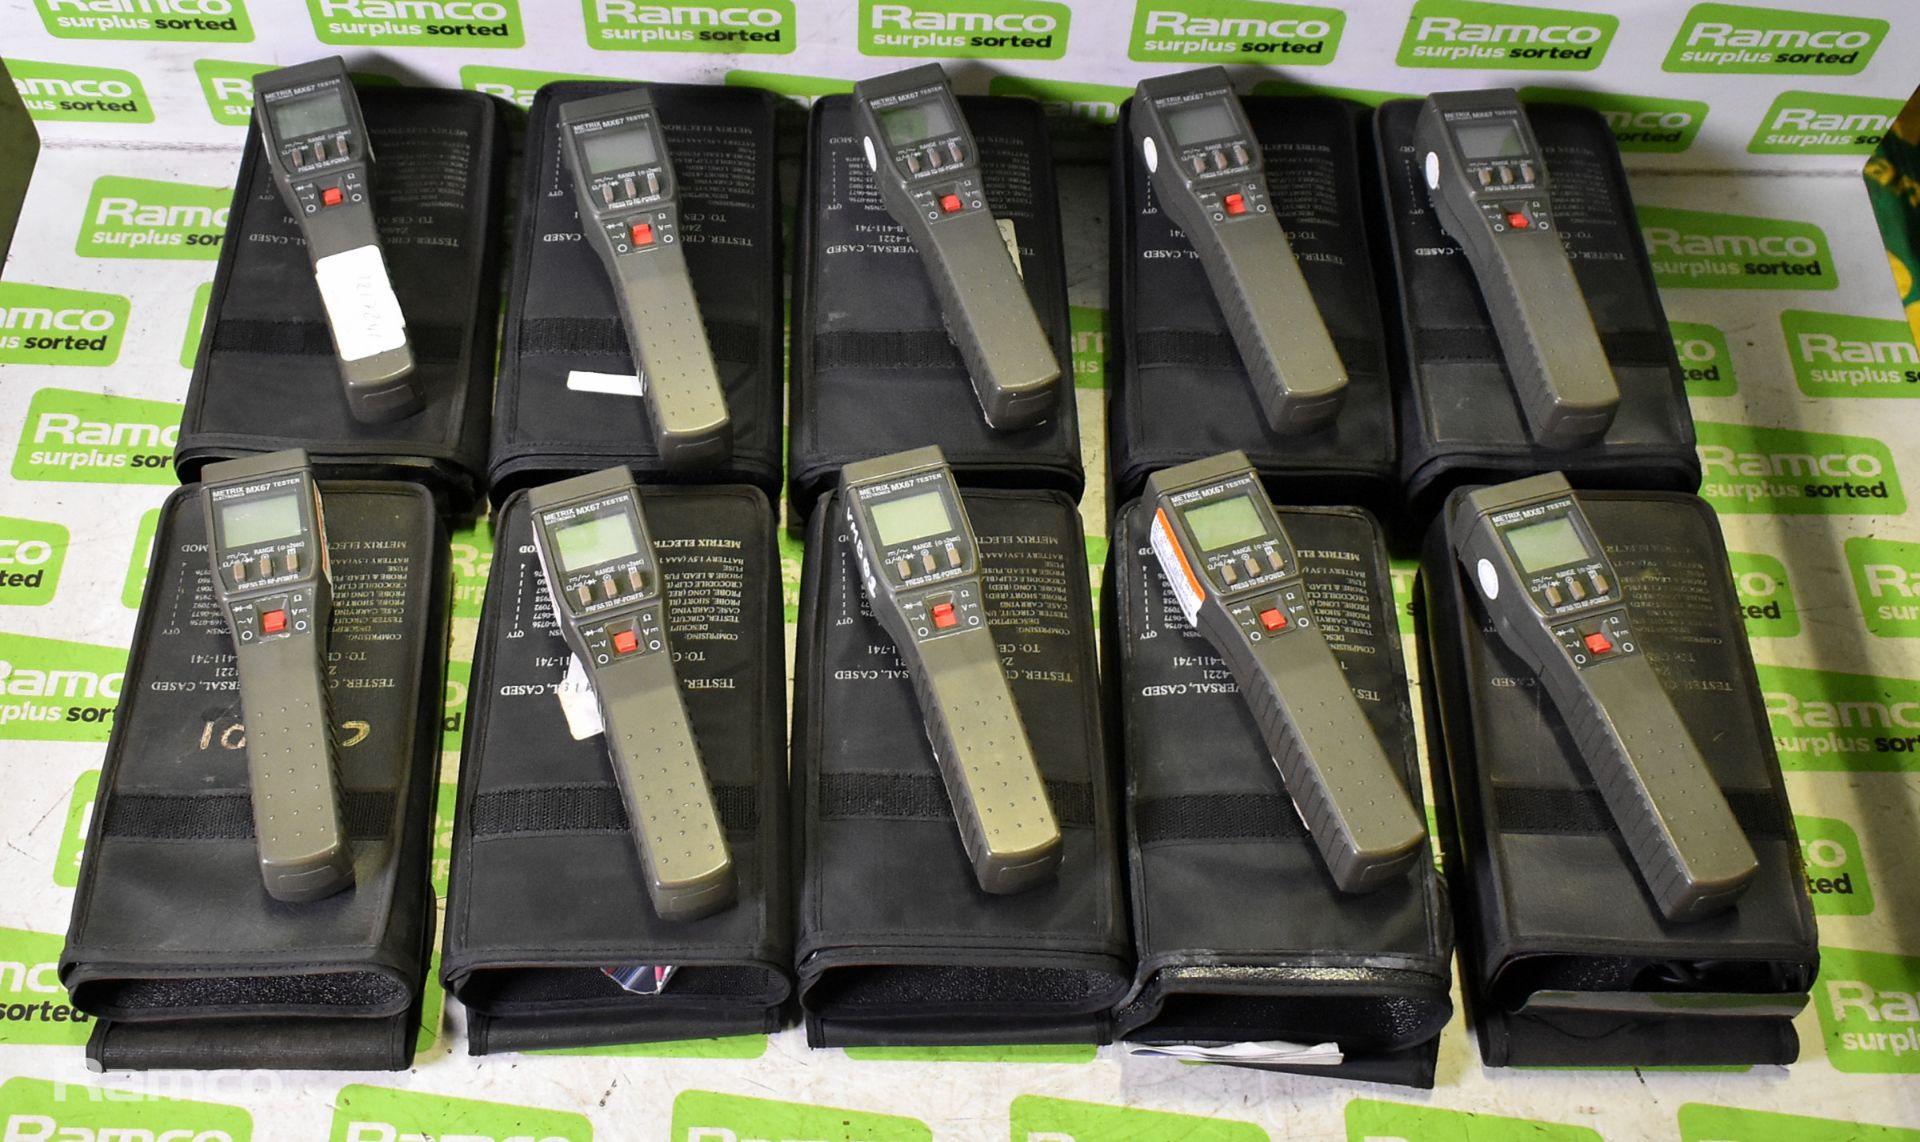 10x Universal circuit testers in cases - Image 2 of 5